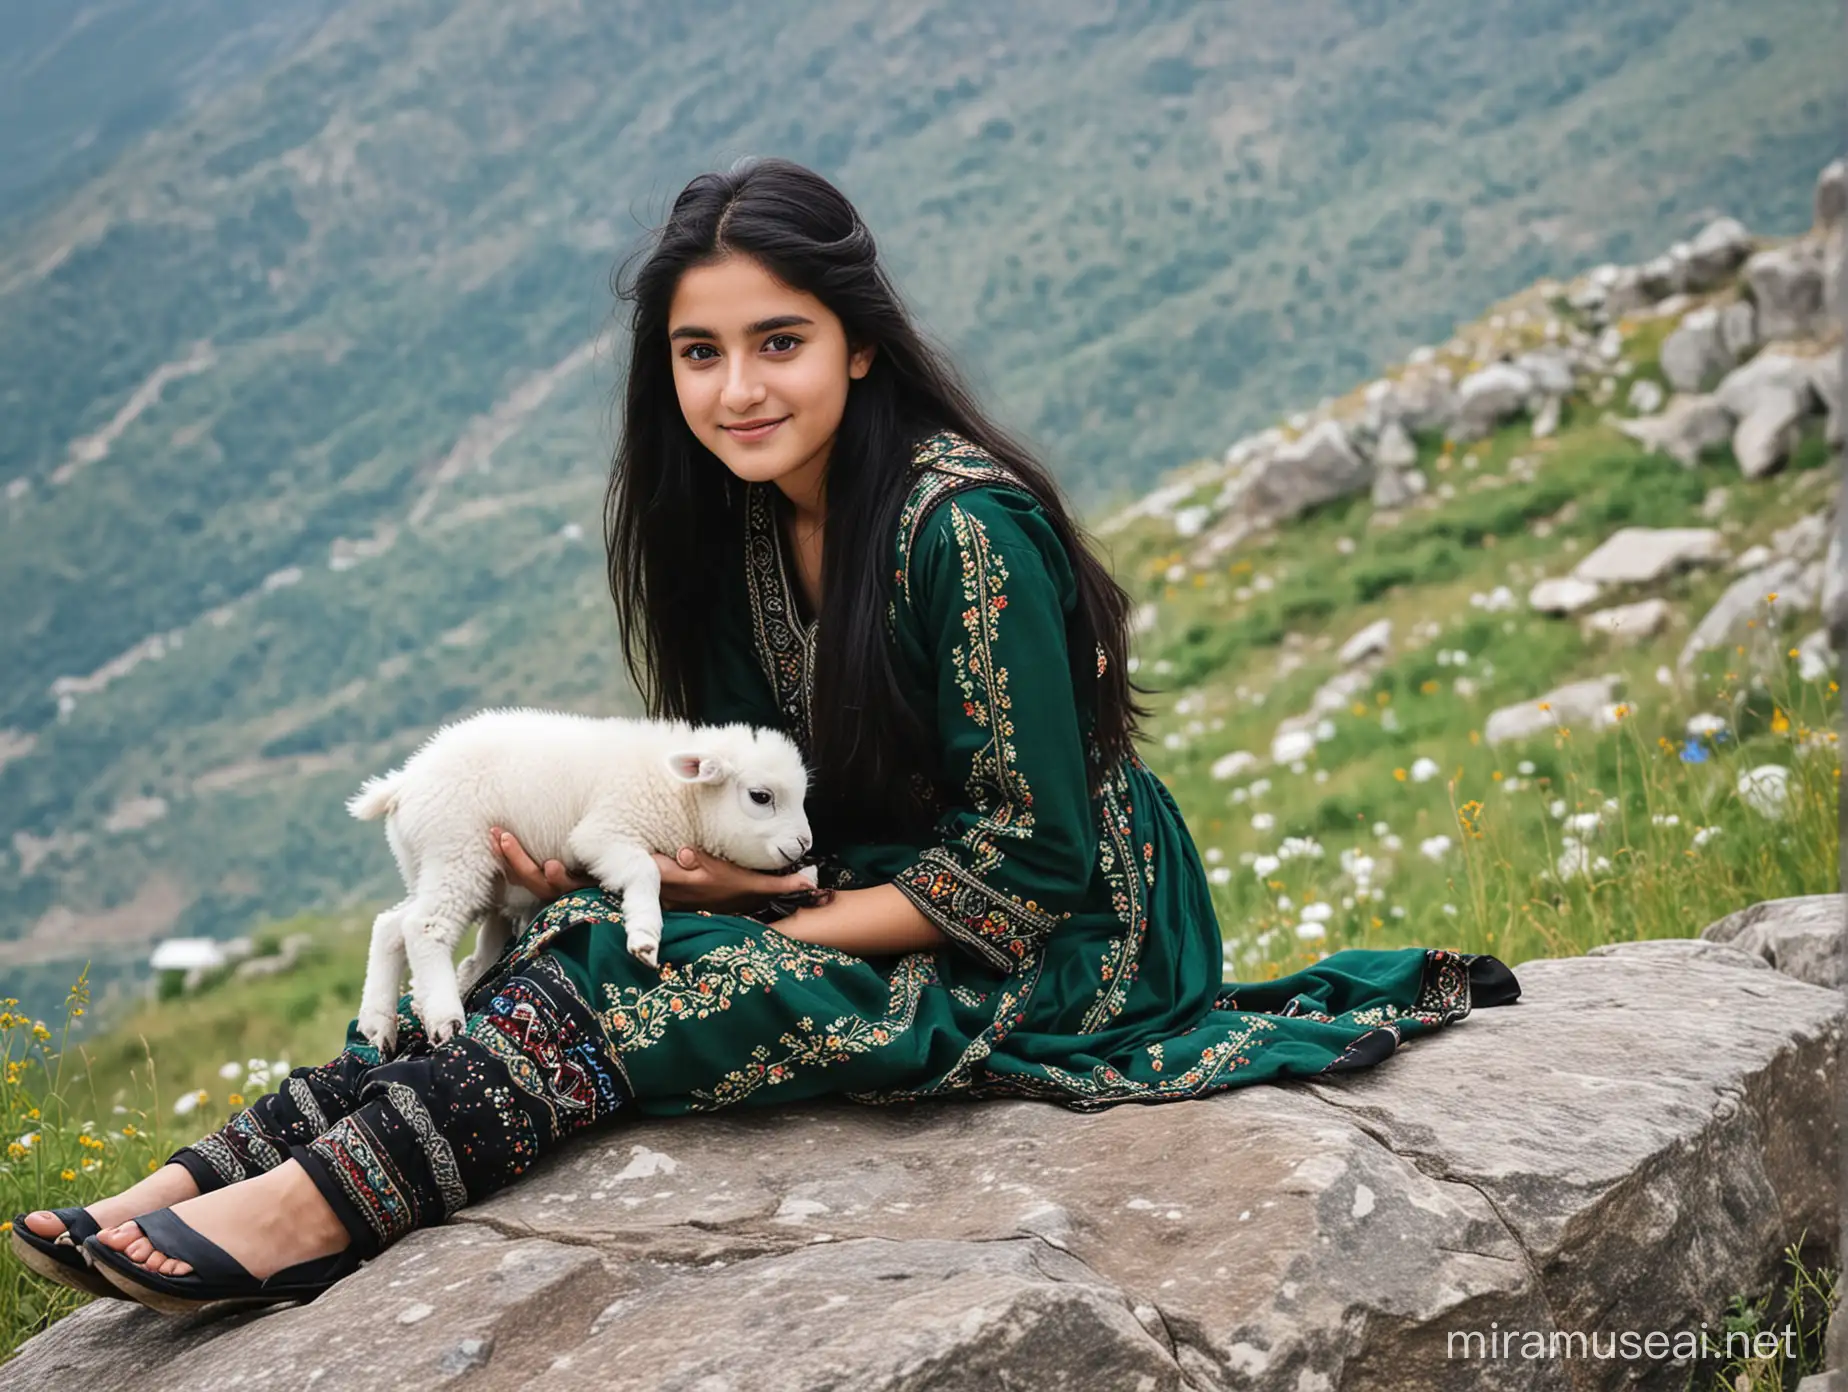 a teen pakistani girl, resident of northern areas of pakistan, fair complexion, long black hairs, blue eyes, black traditional dress, sitting on rock on mountain peek, playing with cute white lamb, lush green environment